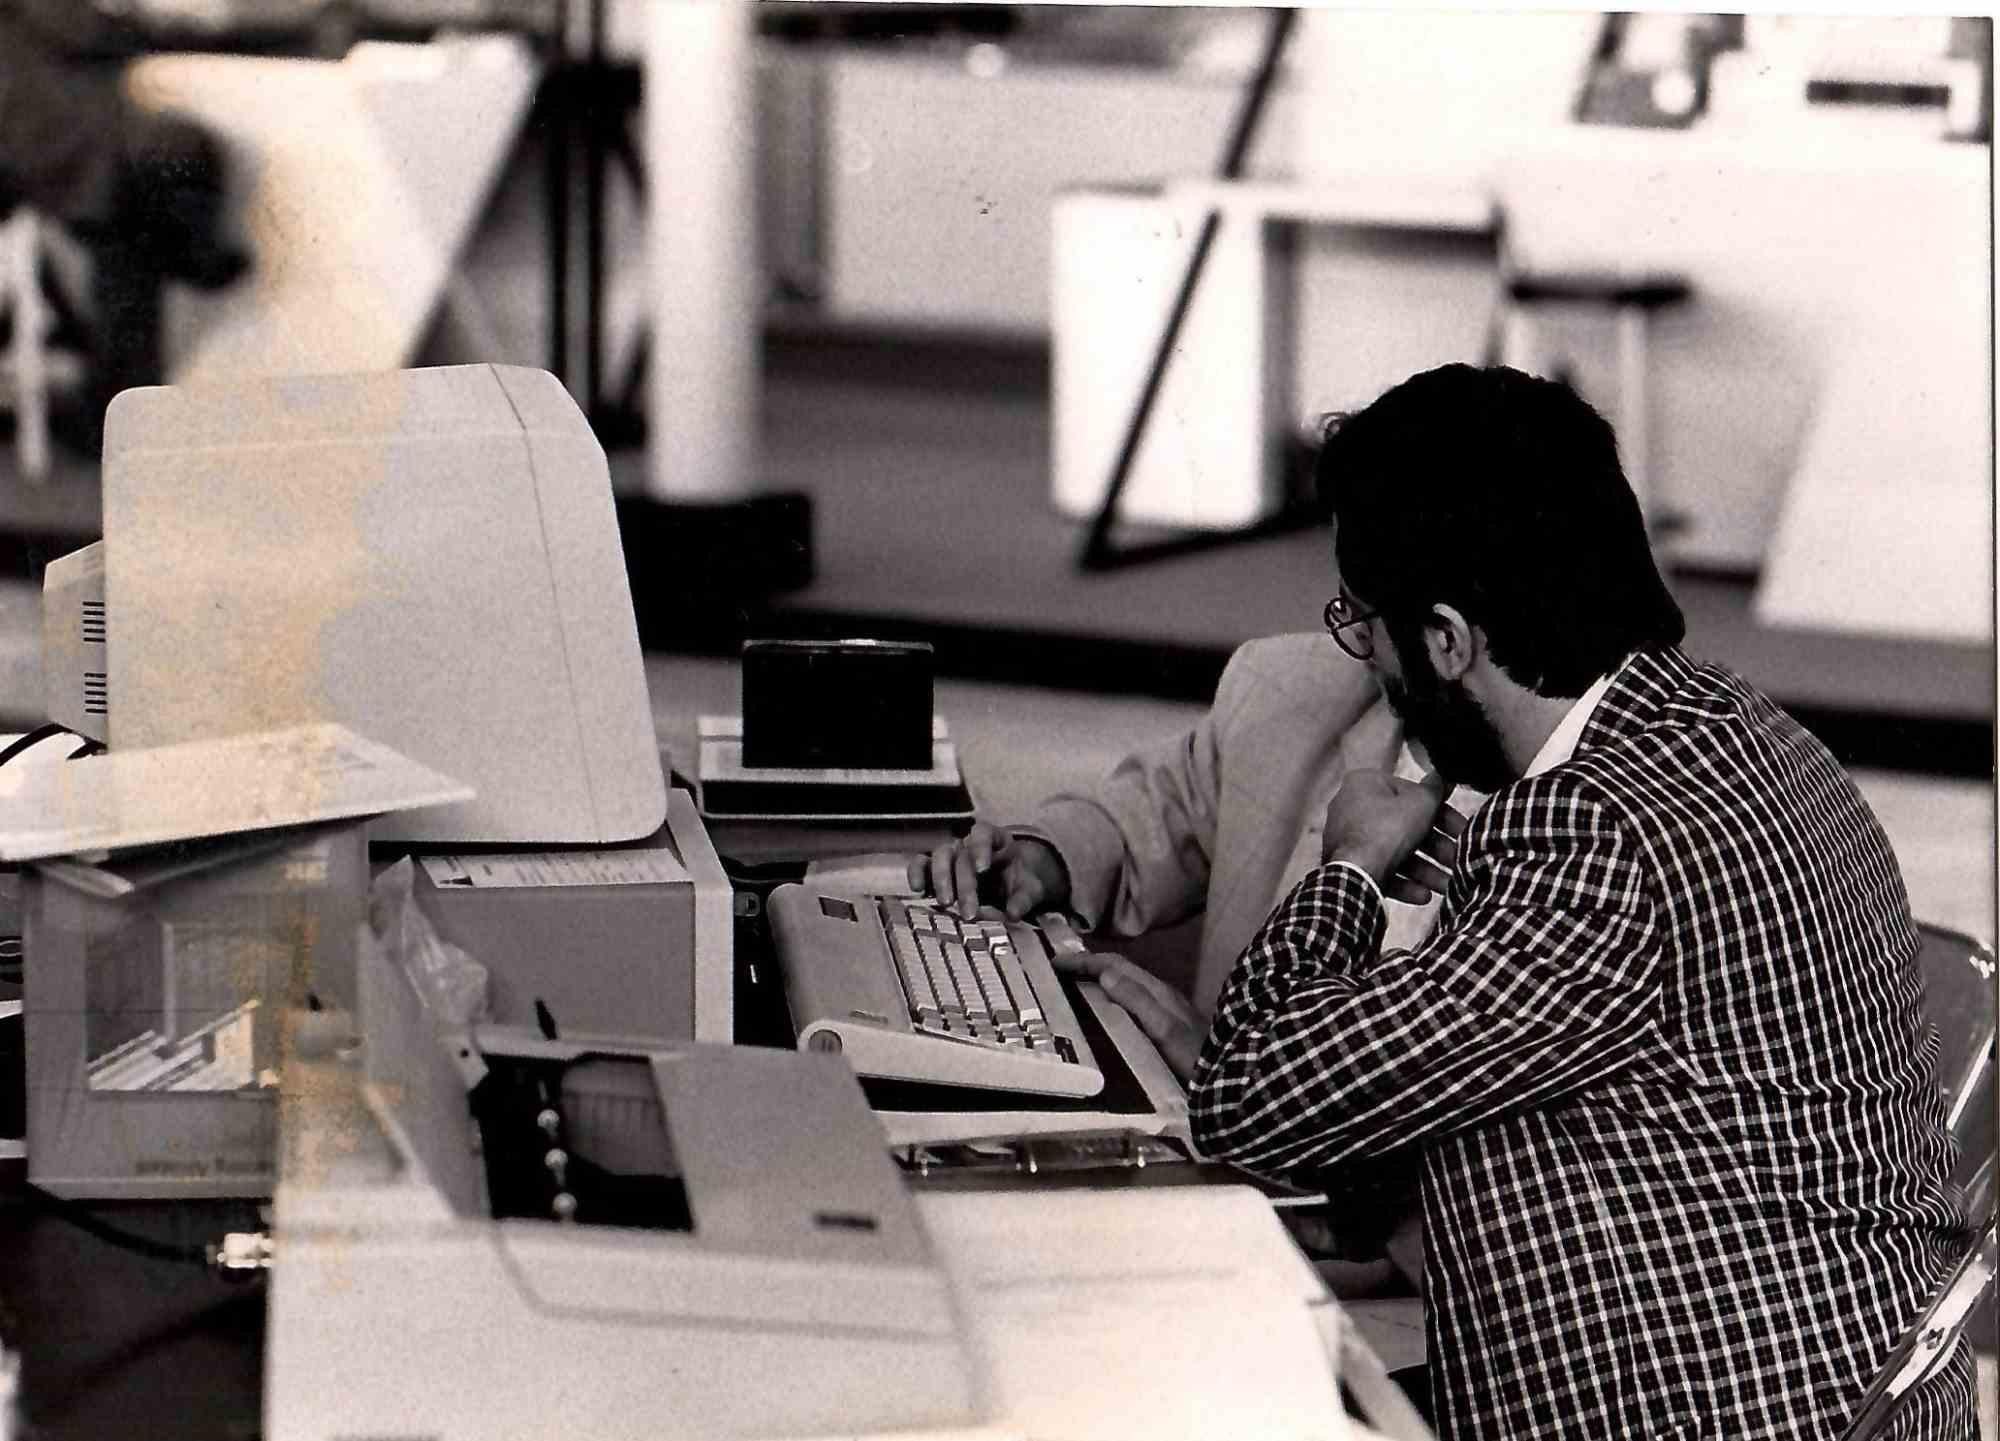 Technology in Progress - Original Photos - 1980s - Photograph by Unknown